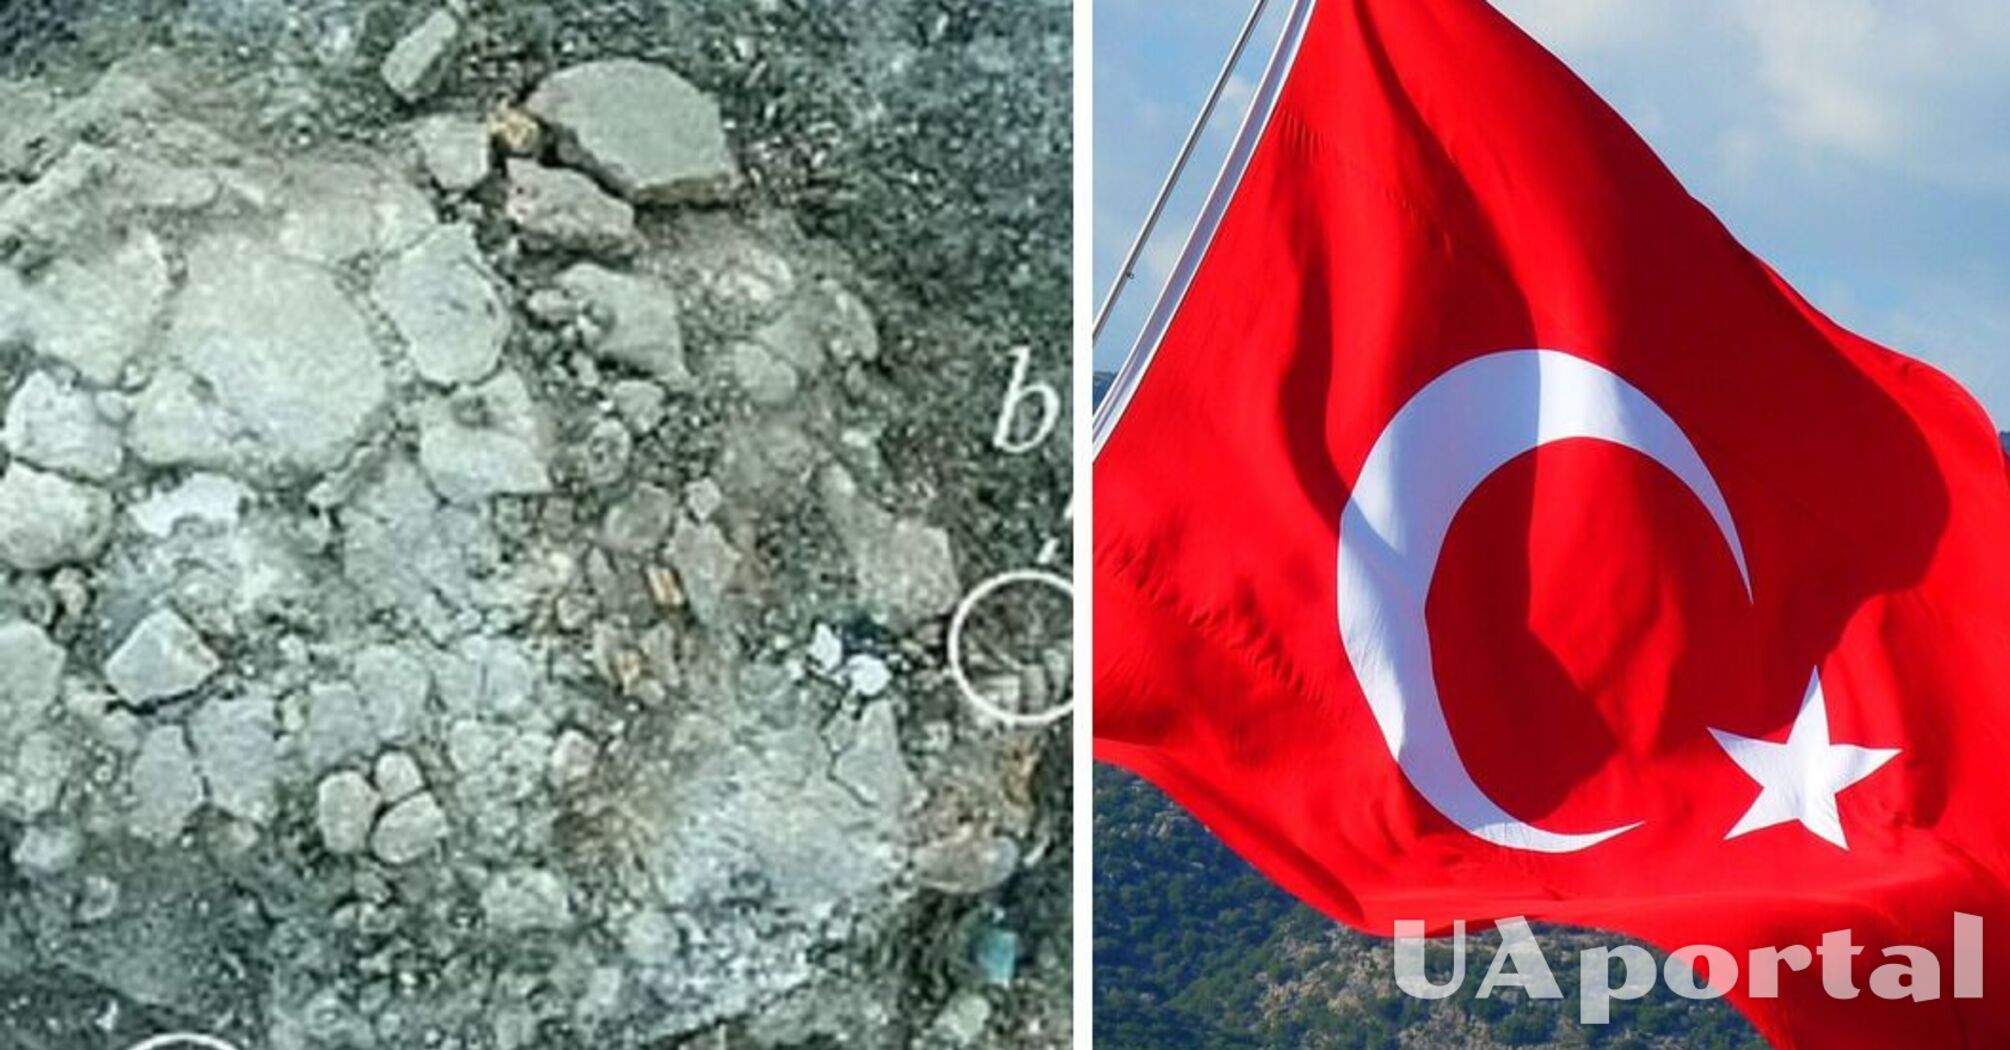 The oldest evidence of body perforation in skeletons 11 thousand years old discovered in Turkey (photo)